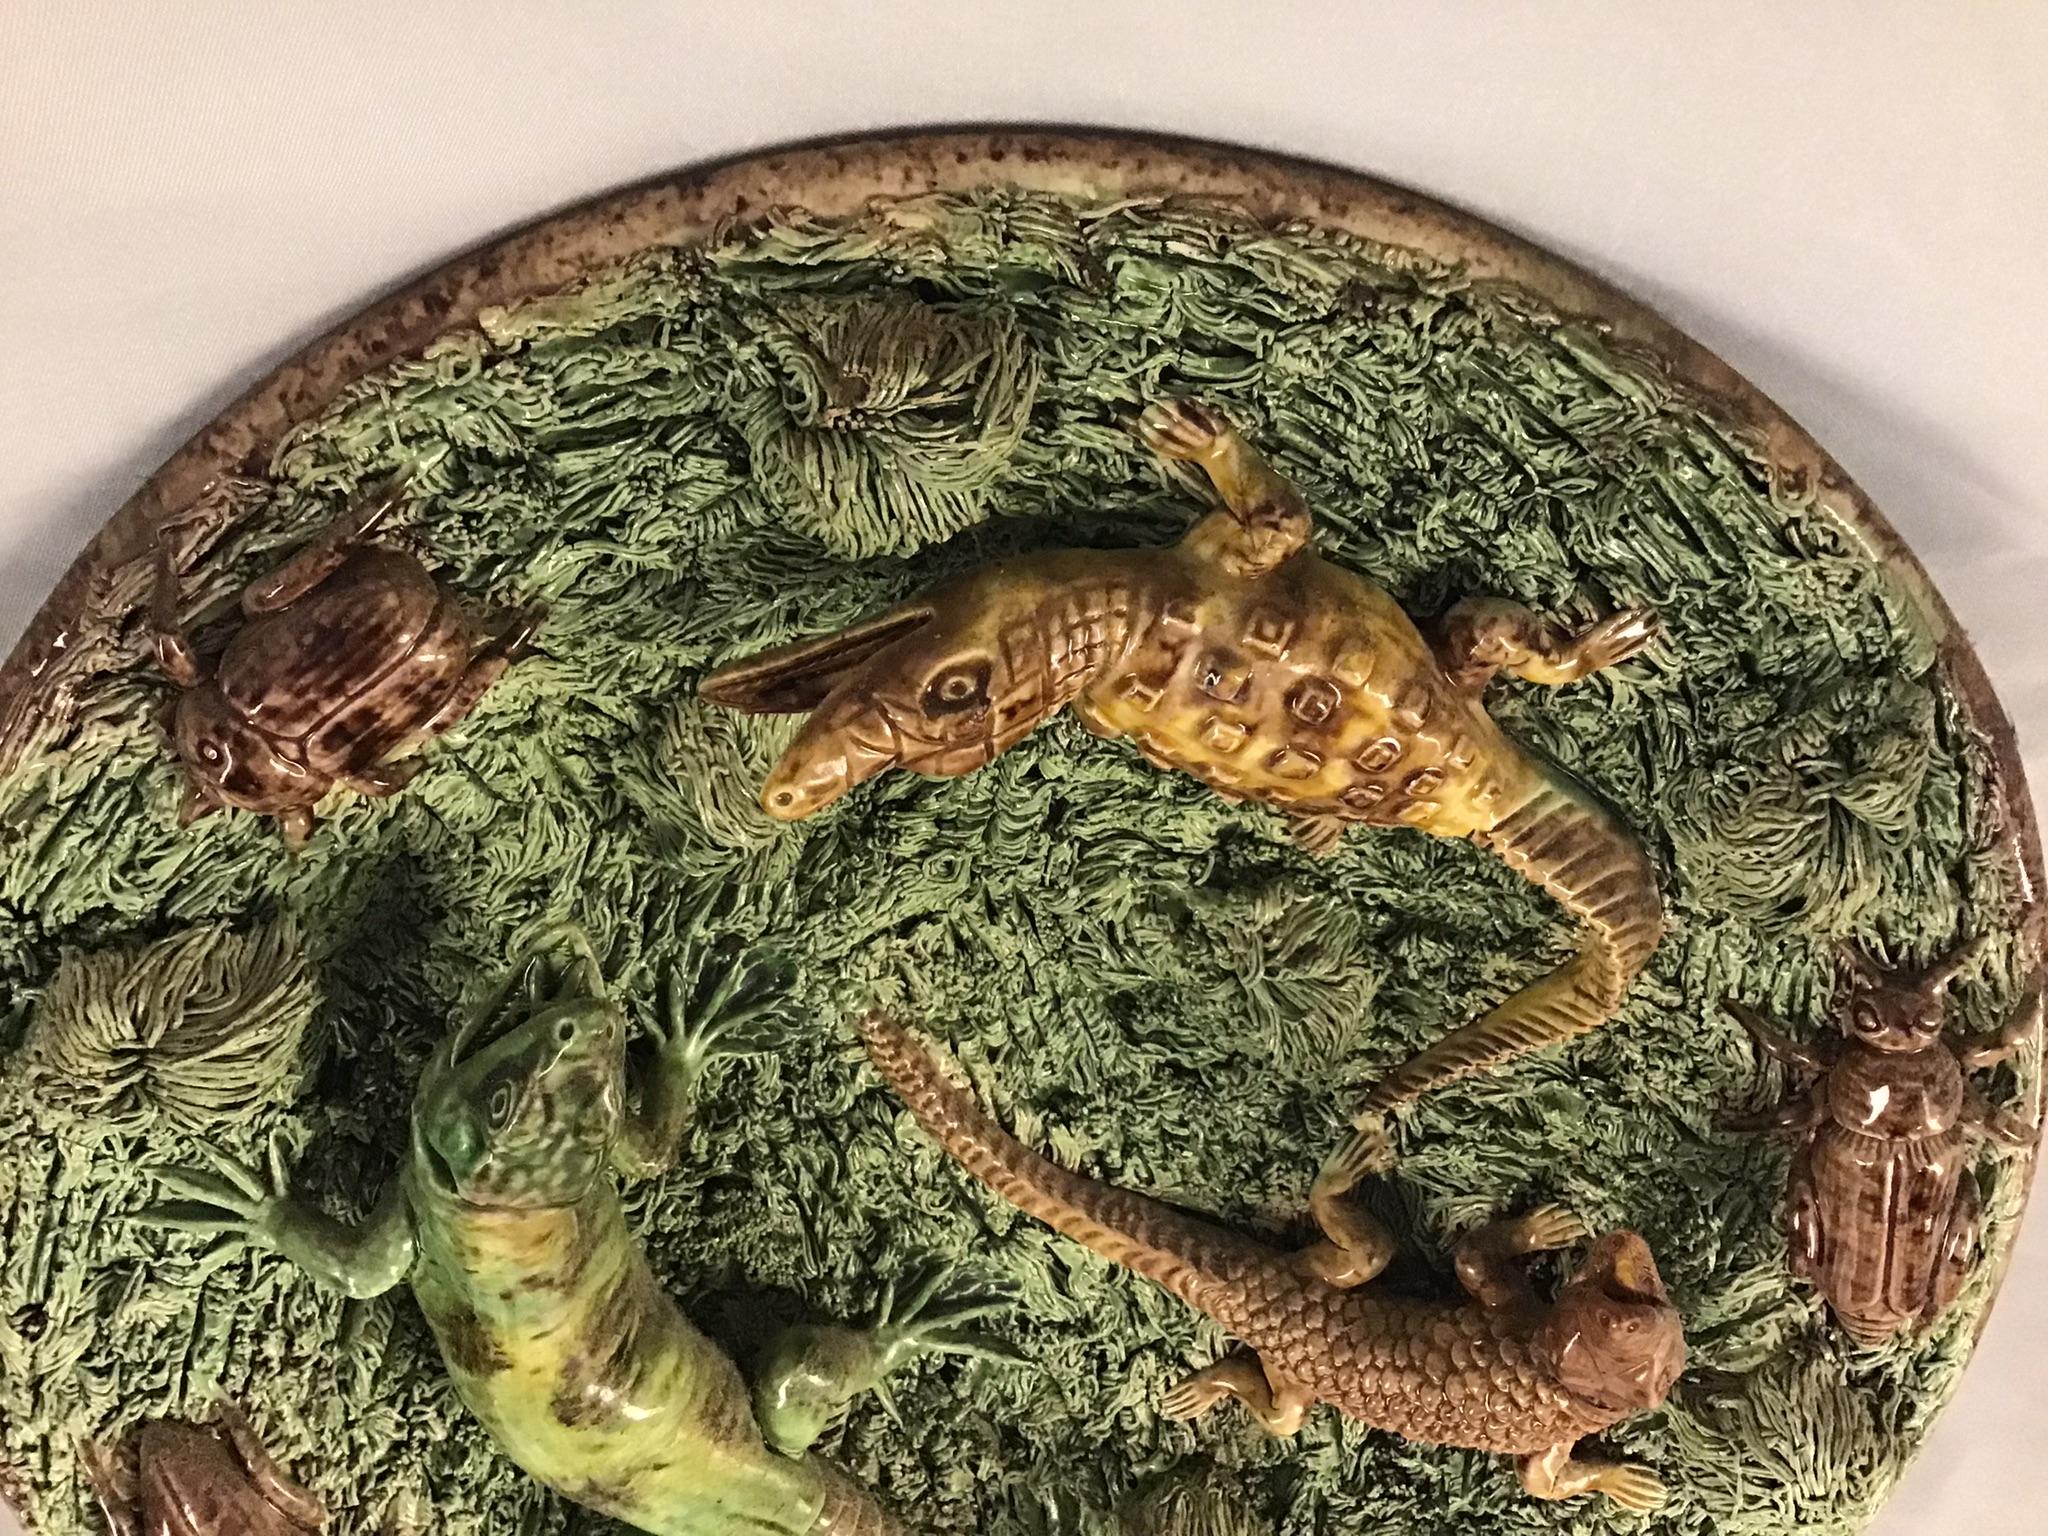 19th Century Portuguese Palissy plate with large alligators, lizards and beatles searching through mossy tuft. Marked on the back Mafra, Caldas.